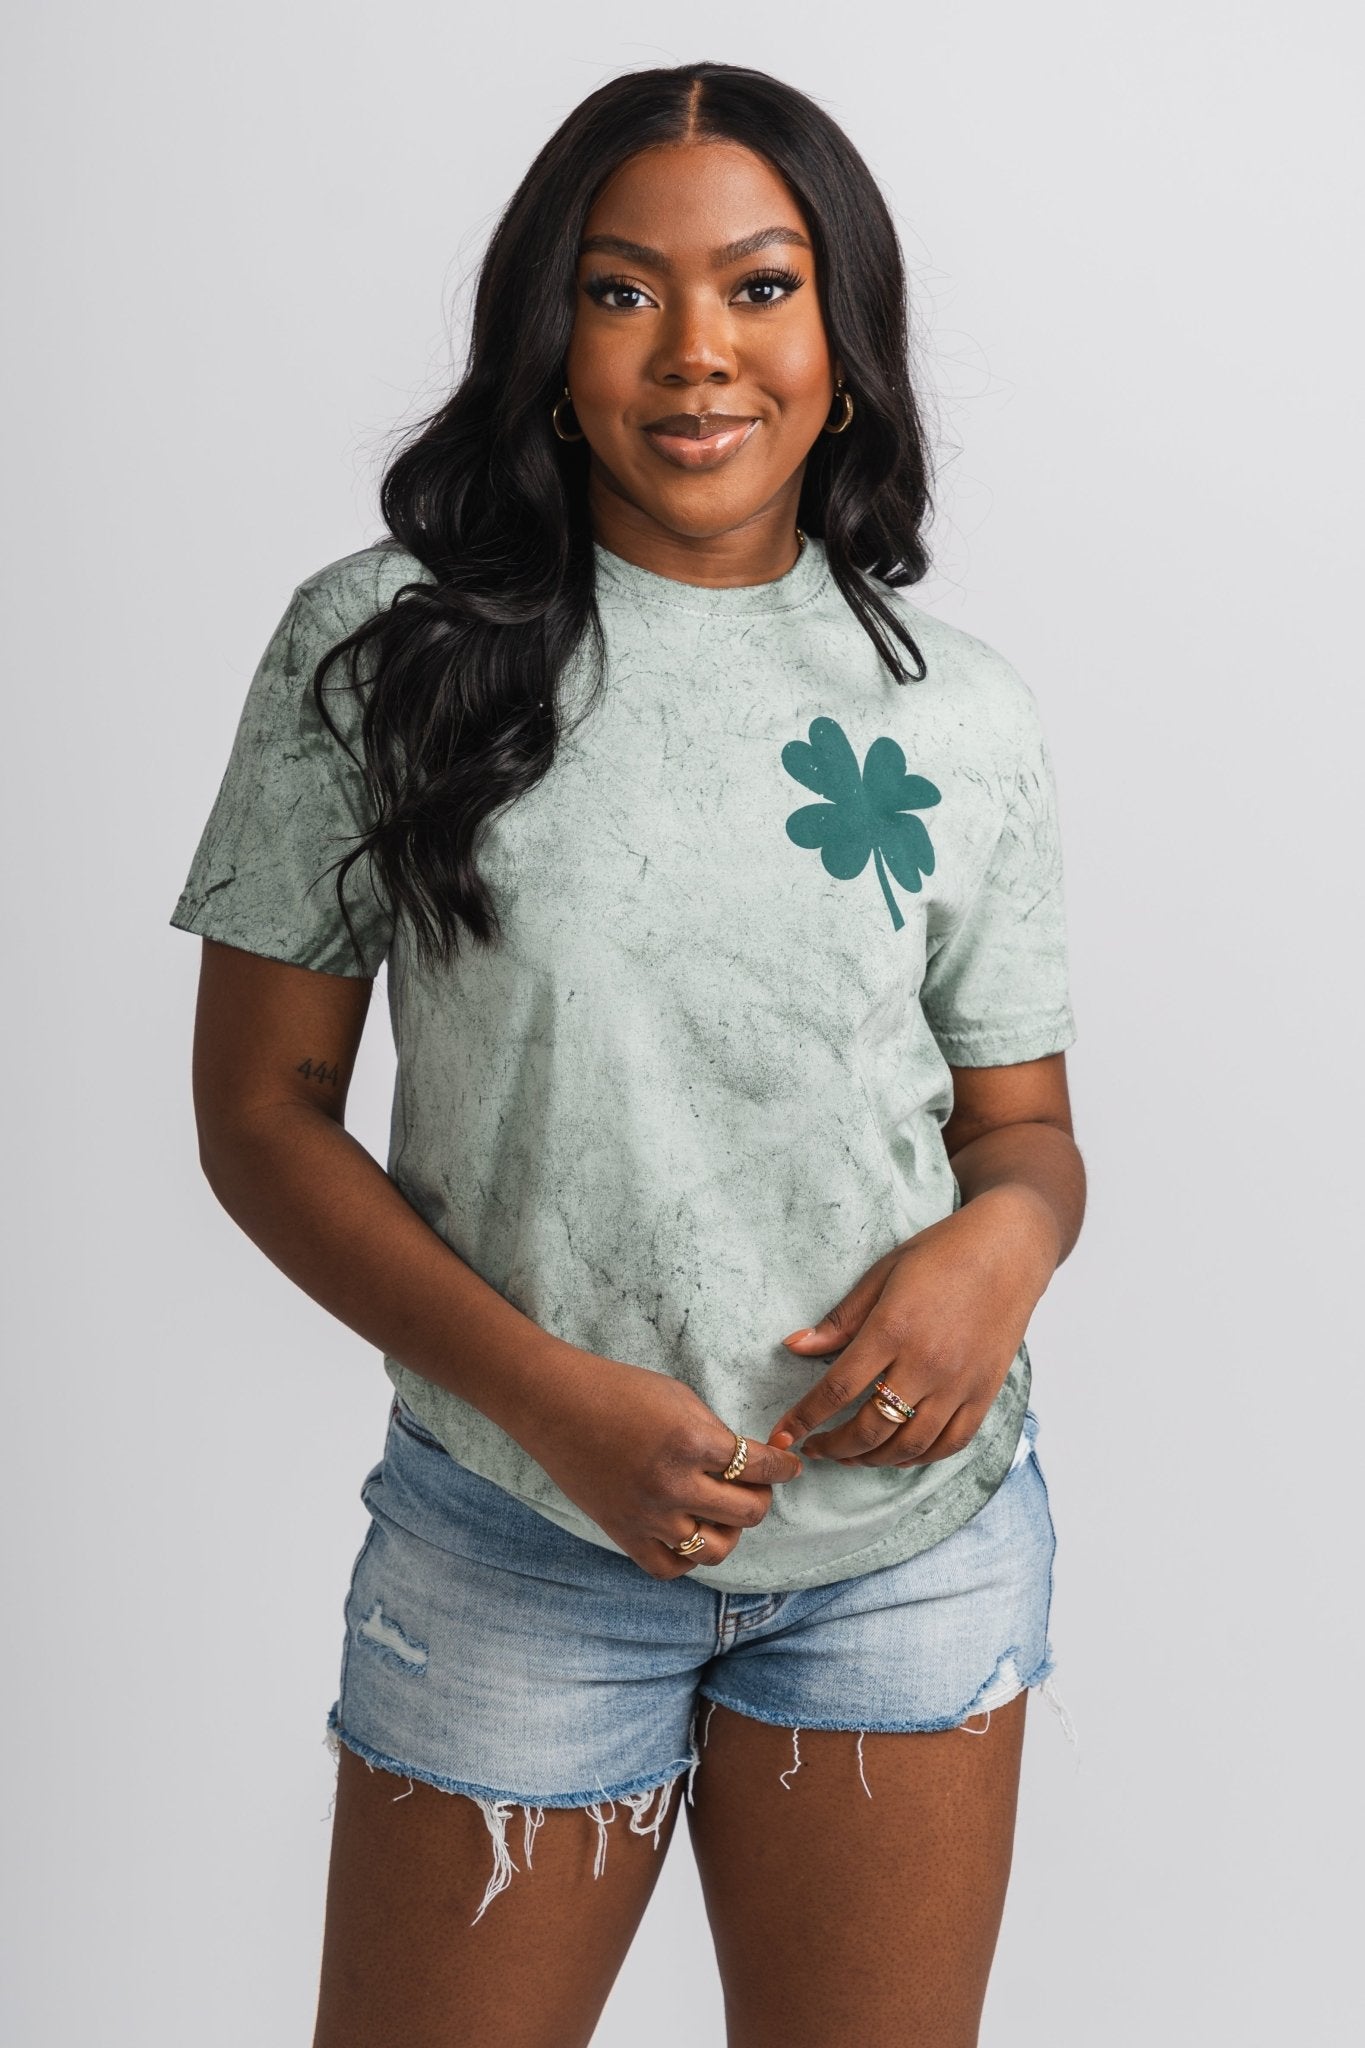 Clover pocket t-shirt fern green - Trendy St. Patrick's T-Shirts at Lush Fashion Lounge Boutique in Oklahoma City